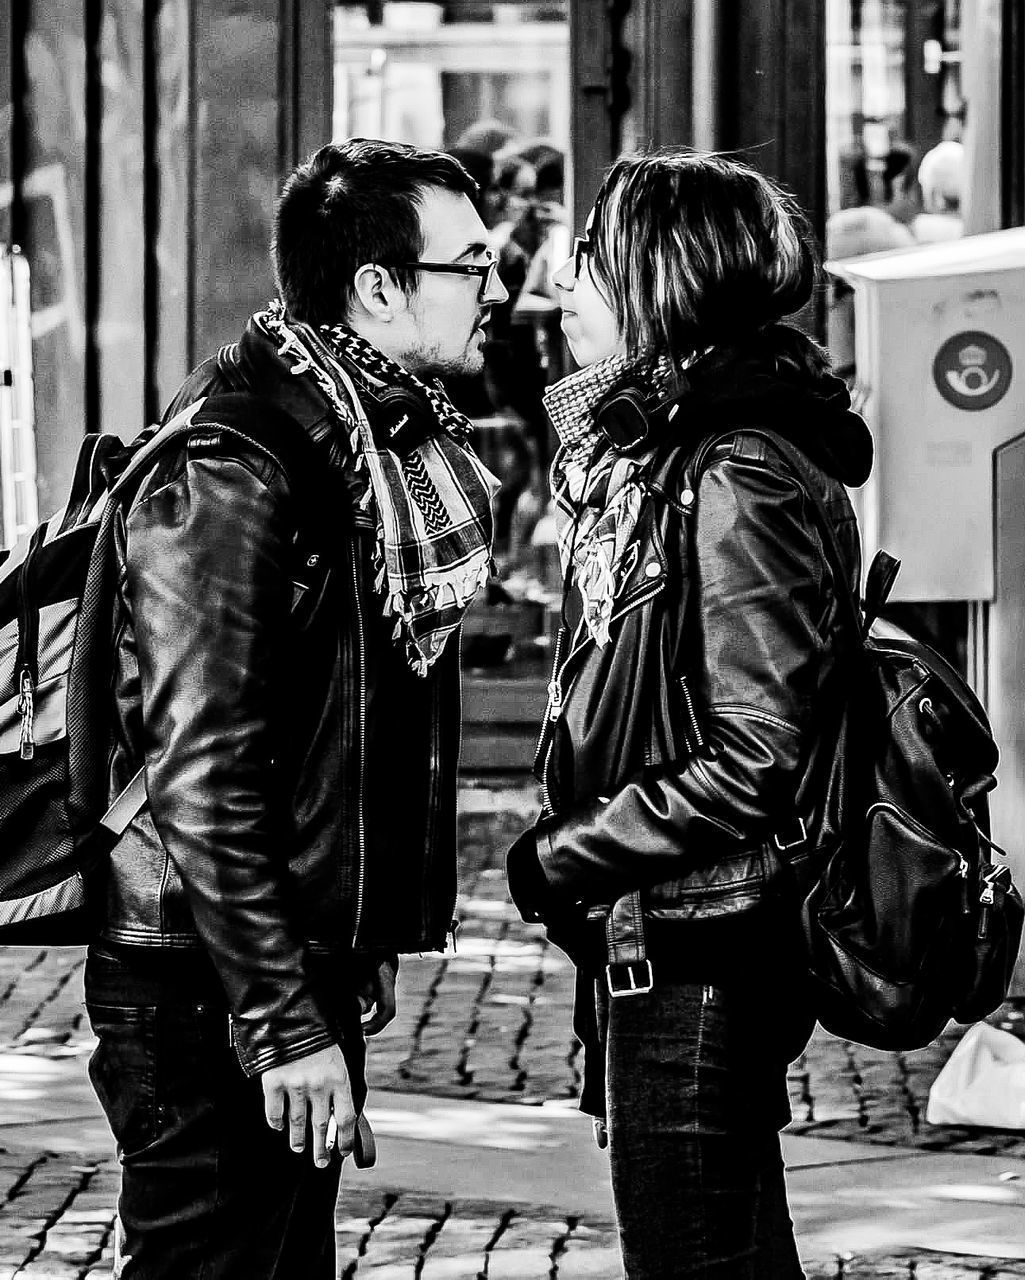 real people, two people, city, architecture, three quarter length, building exterior, street, lifestyles, adult, women, day, casual clothing, built structure, togetherness, walking, people, leisure activity, men, jacket, focus on foreground, outdoors, leather, leather jacket, positive emotion, couple - relationship, warm clothing, hairstyle